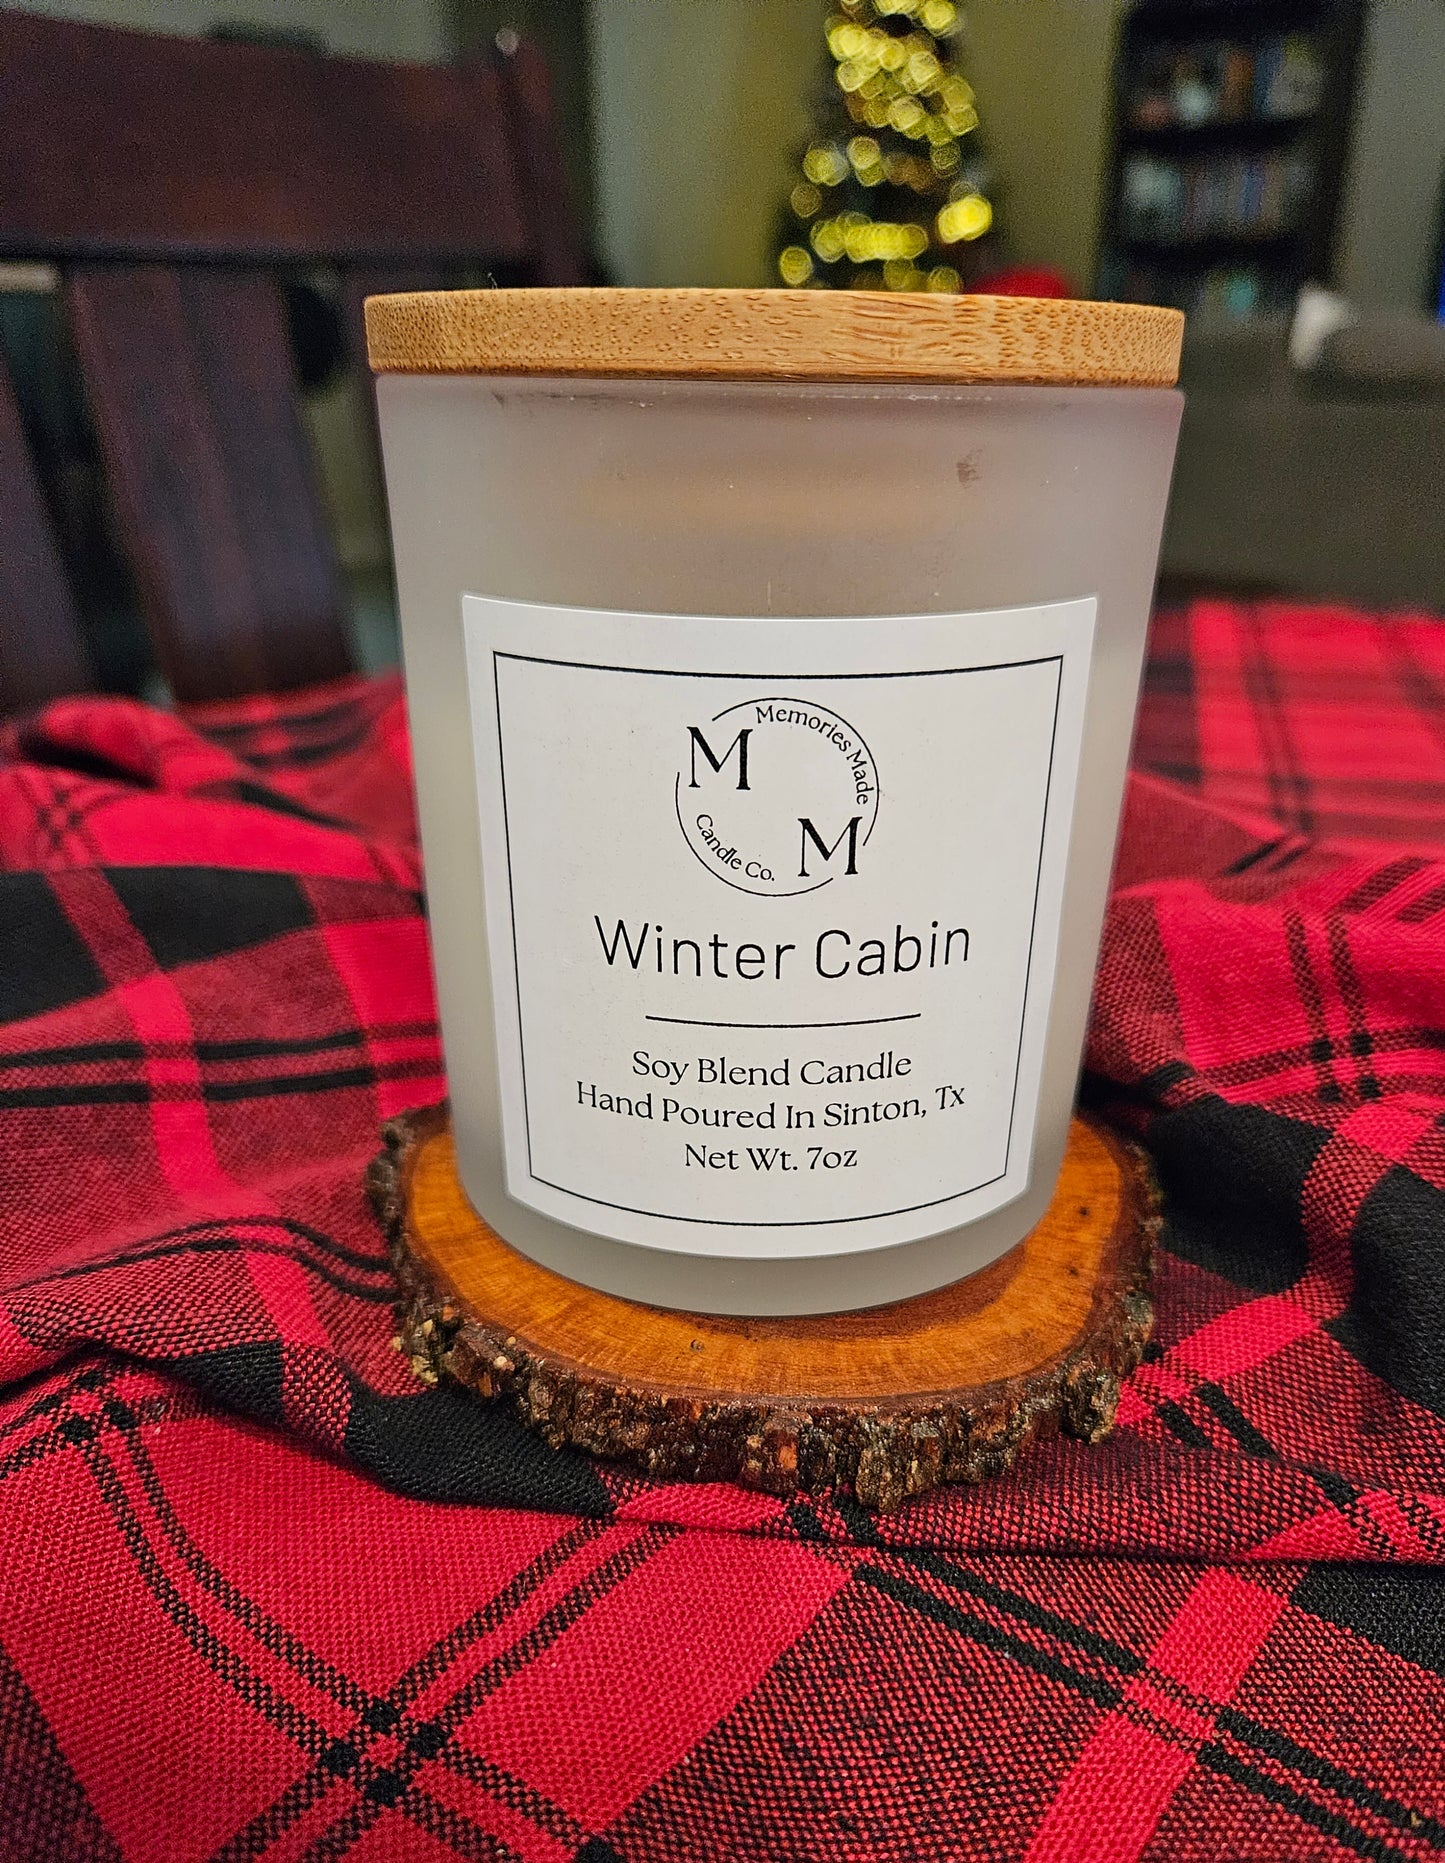 Winter Cabin 7 oz, Soy Blend Candle